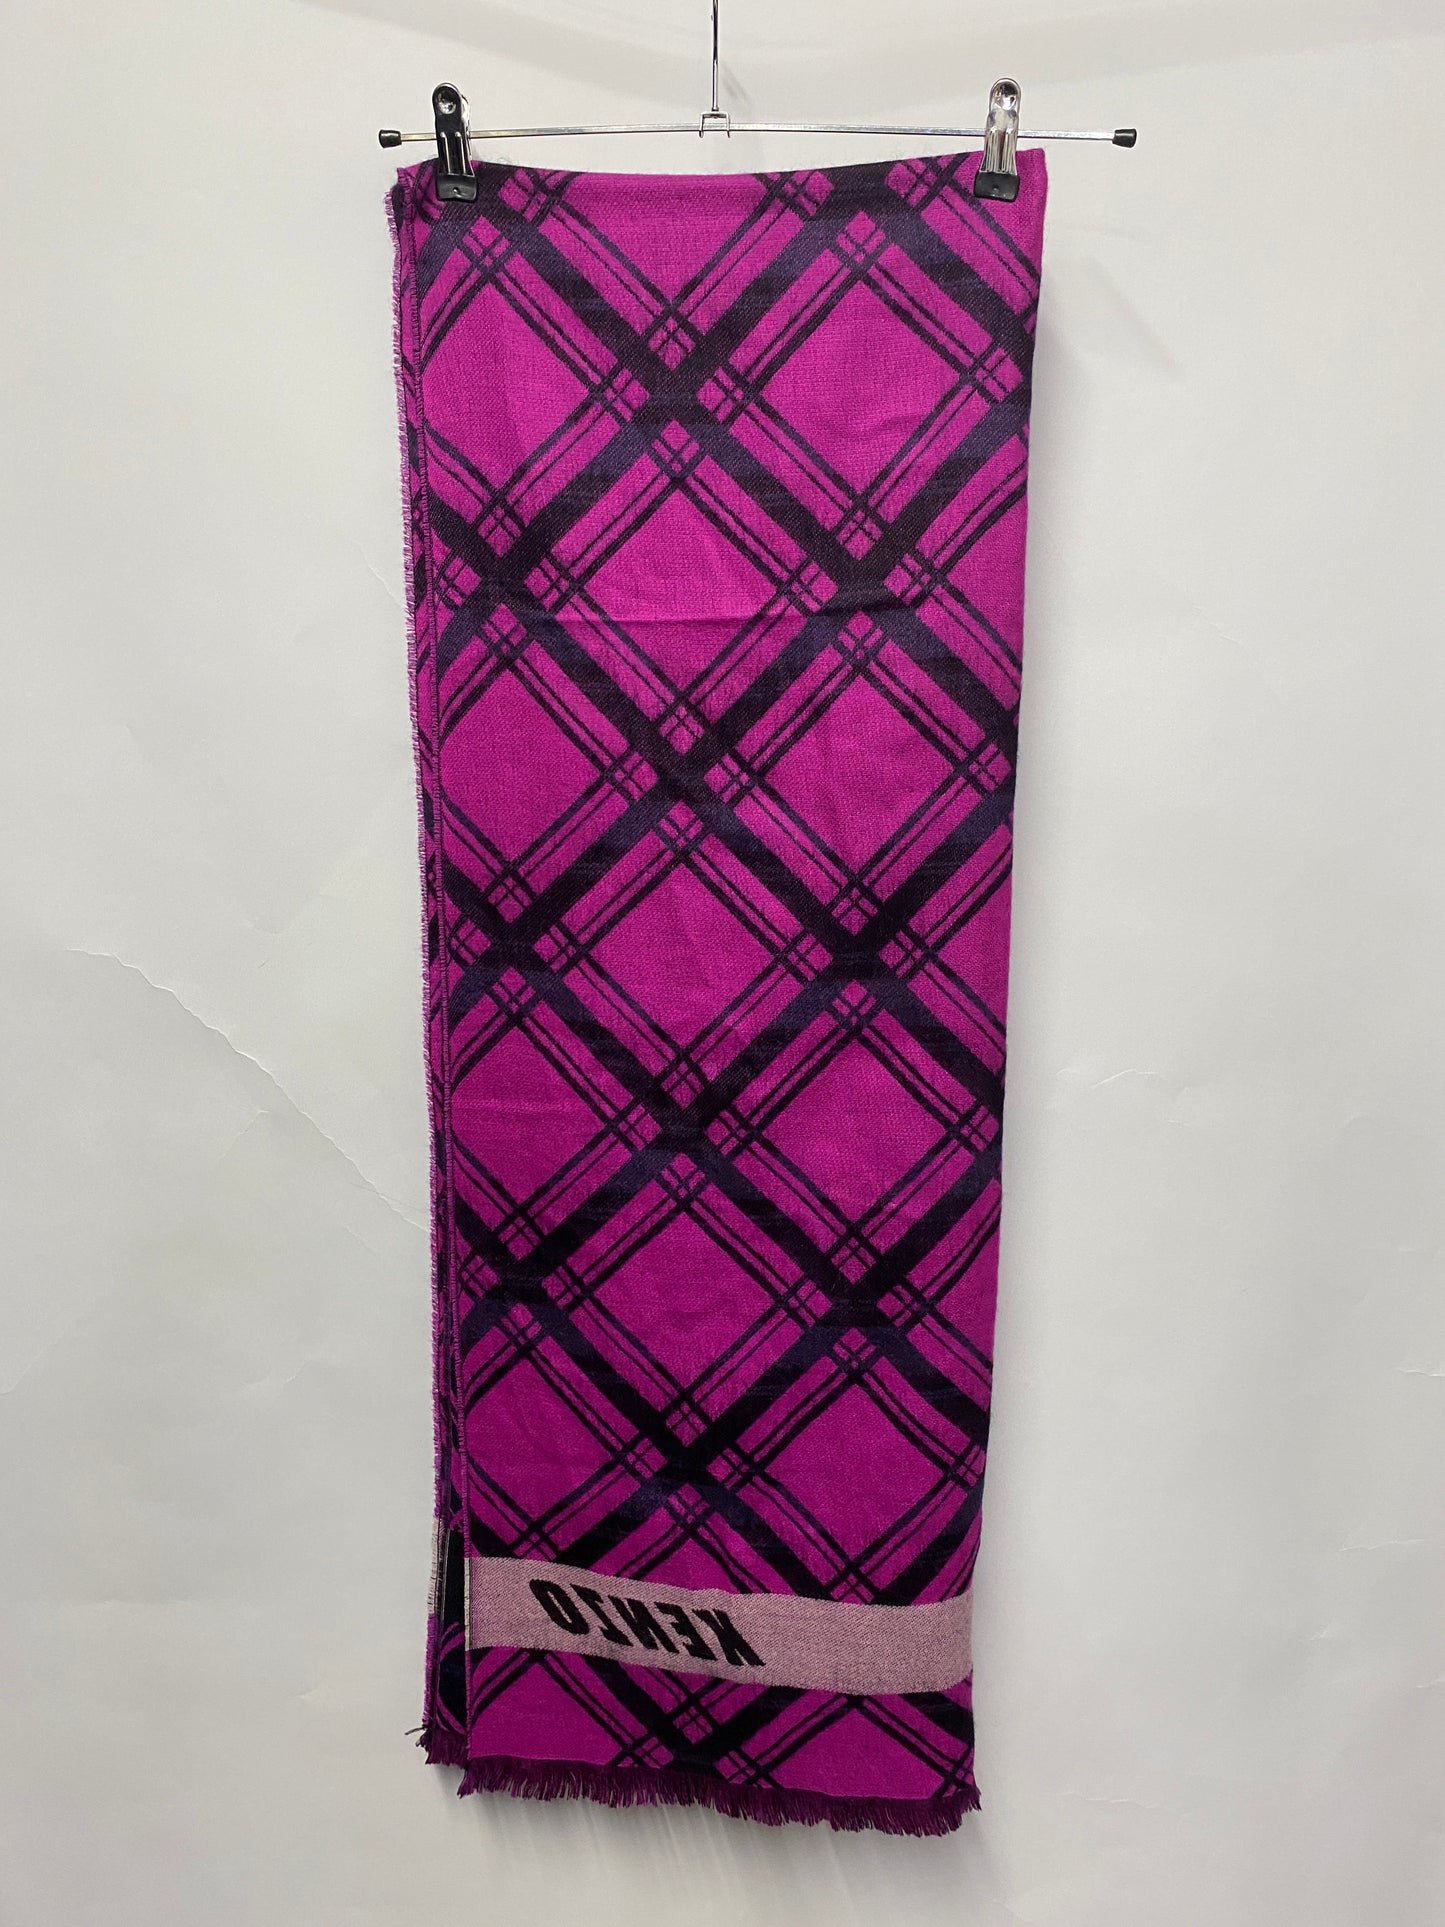 Kenzo Pink and Black Check Silk and Wool Blend Scarf